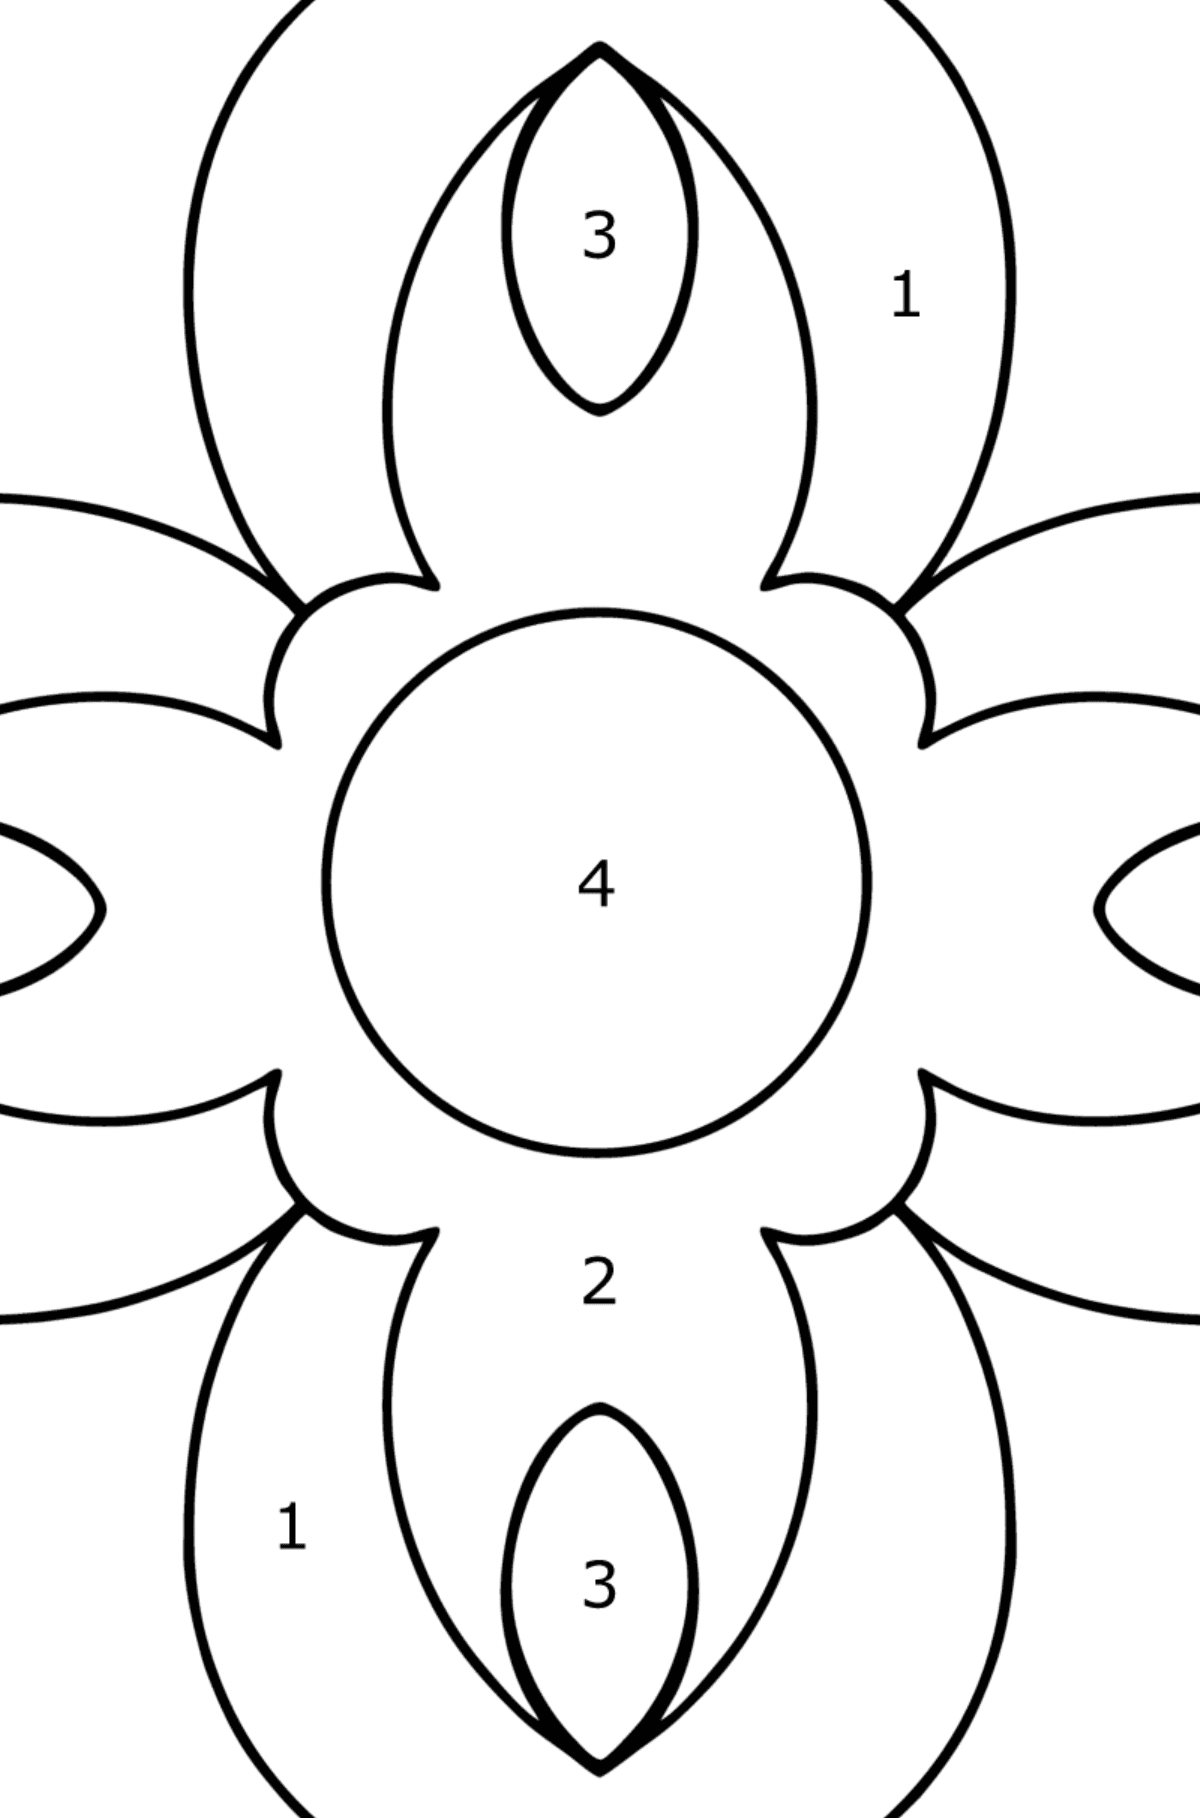 Coloring book for kids - Anti stress flower - Coloring by Numbers for Kids